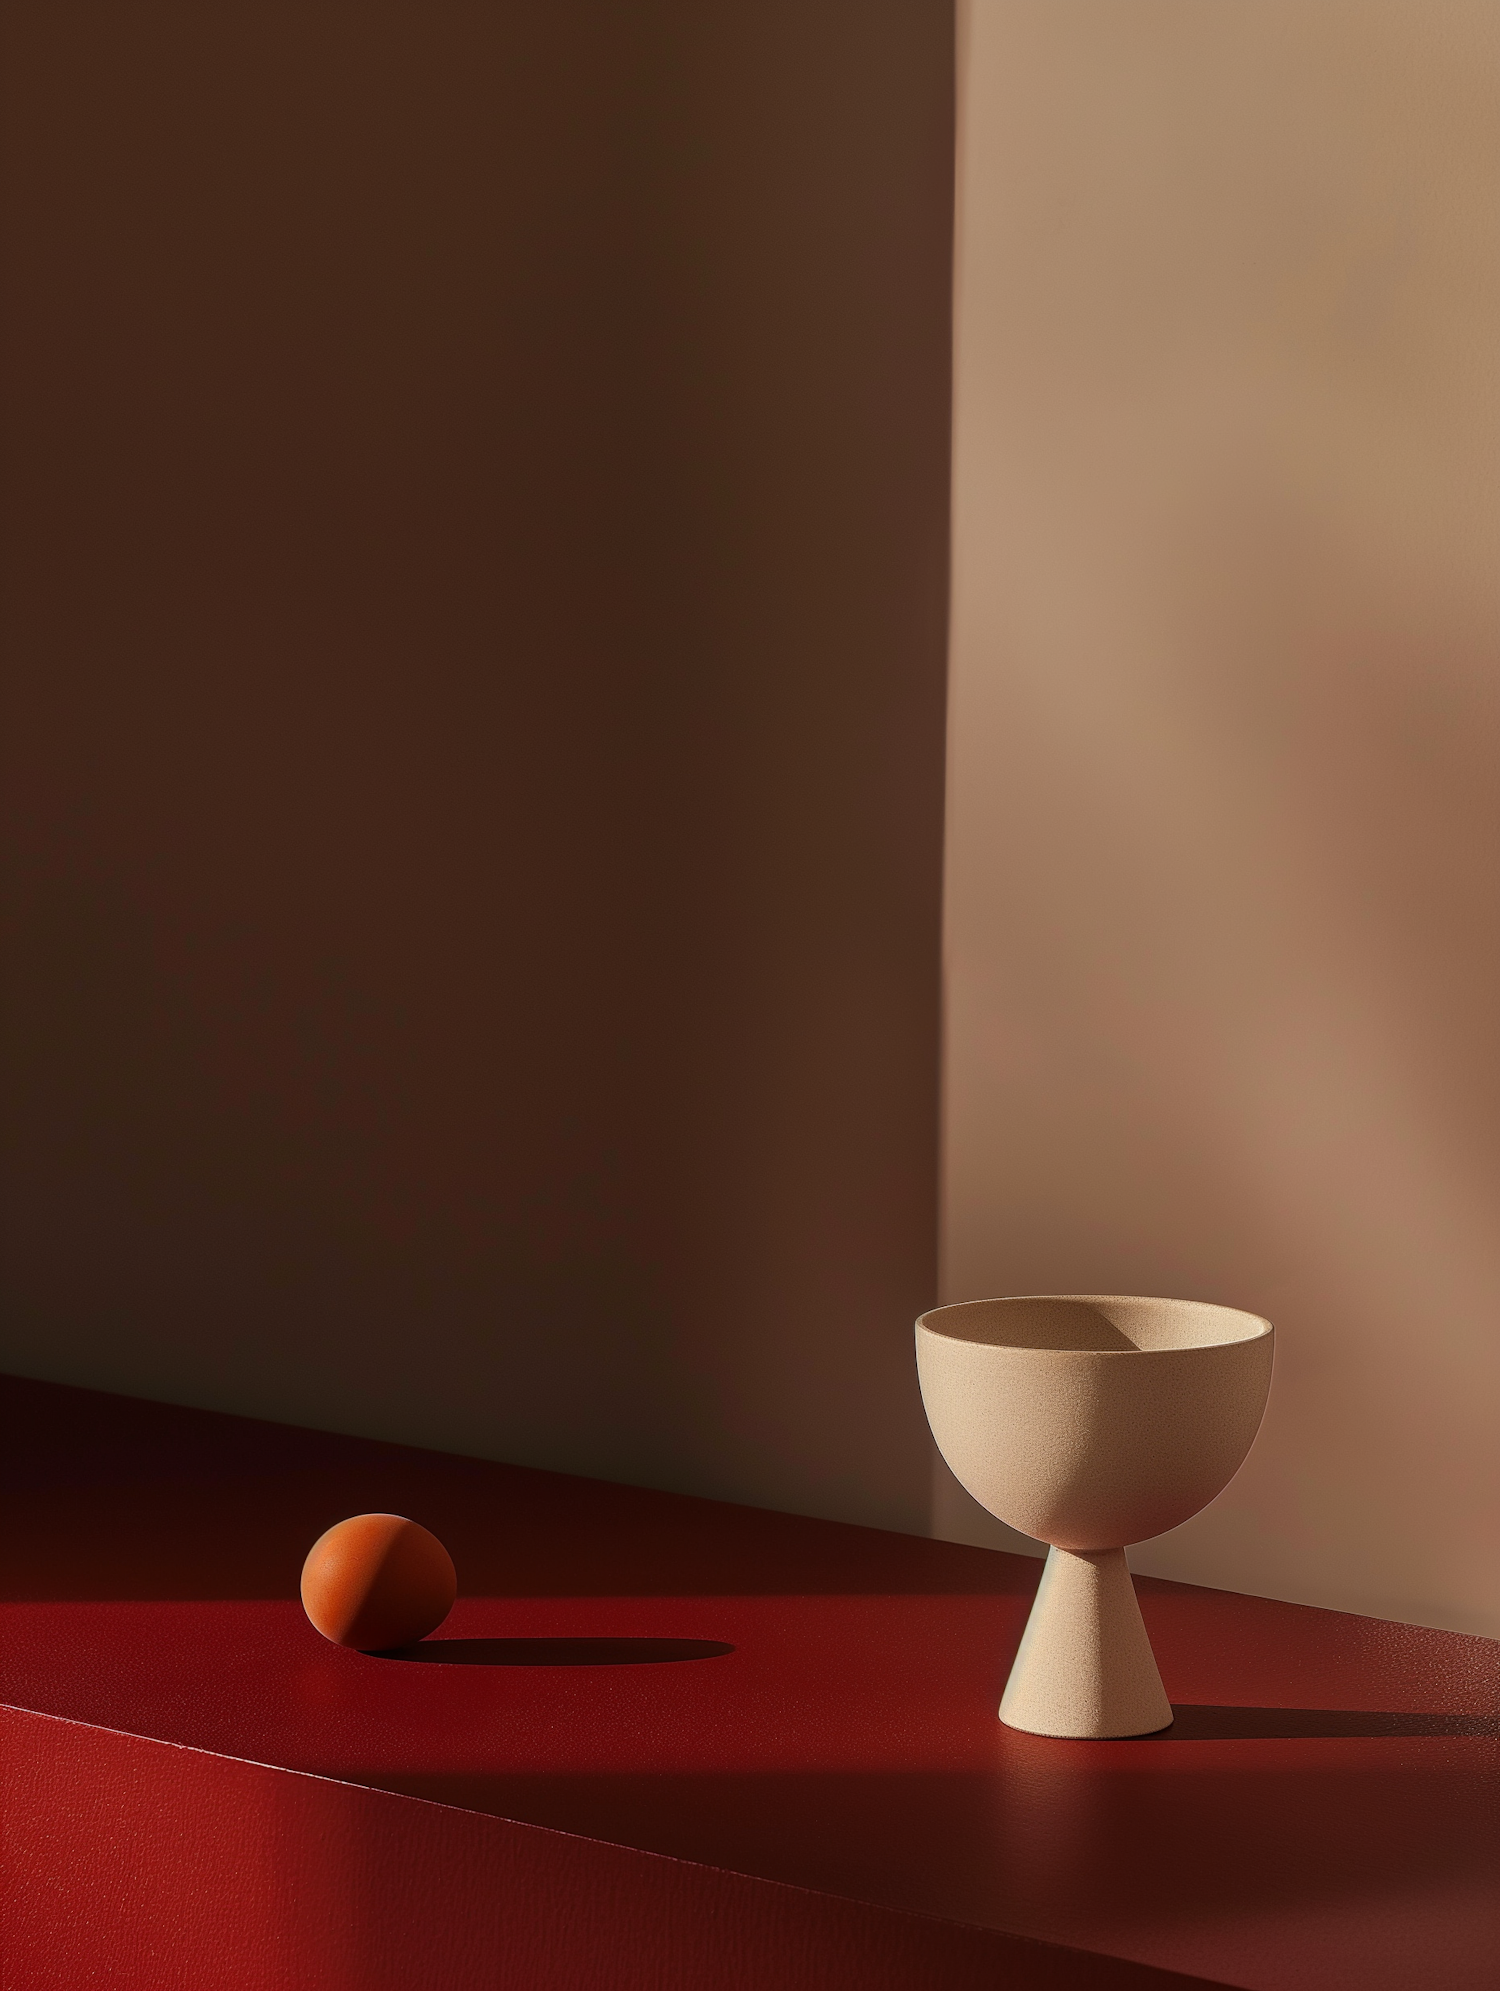 Minimalistic Still Life with Egg and Bowl